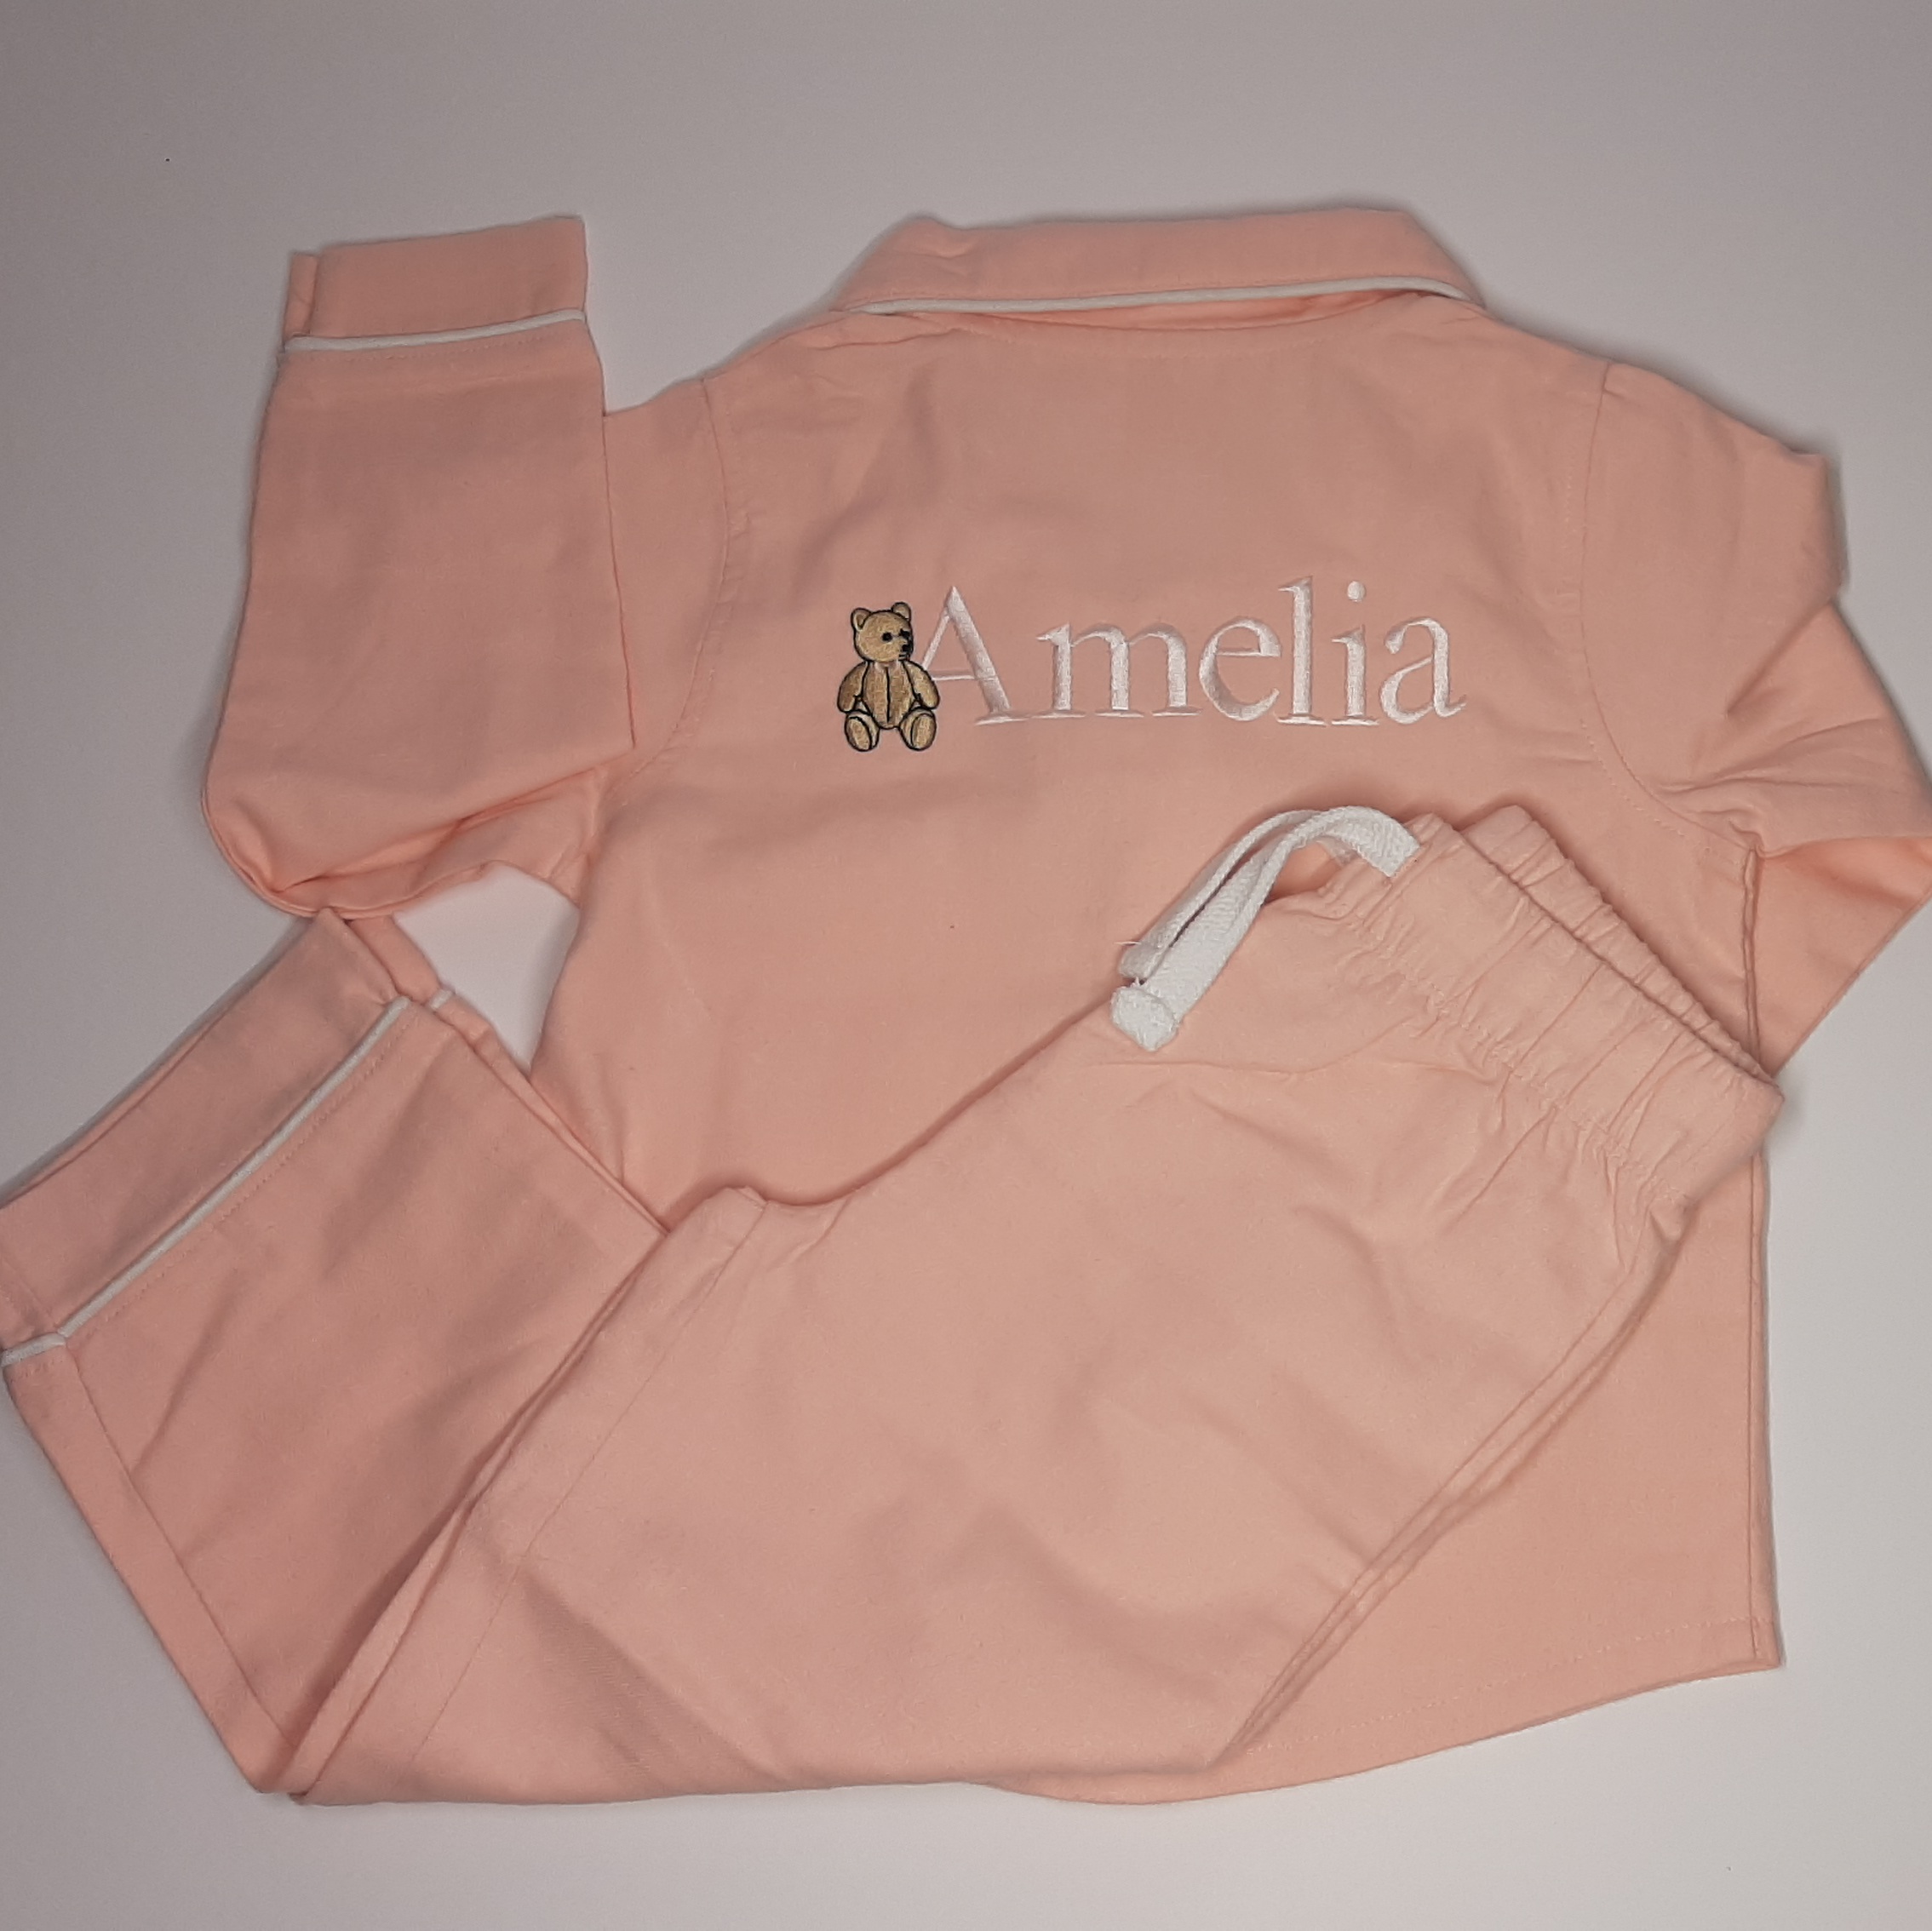 dusky pink classic children's pj on the back, with embroidered name with bear